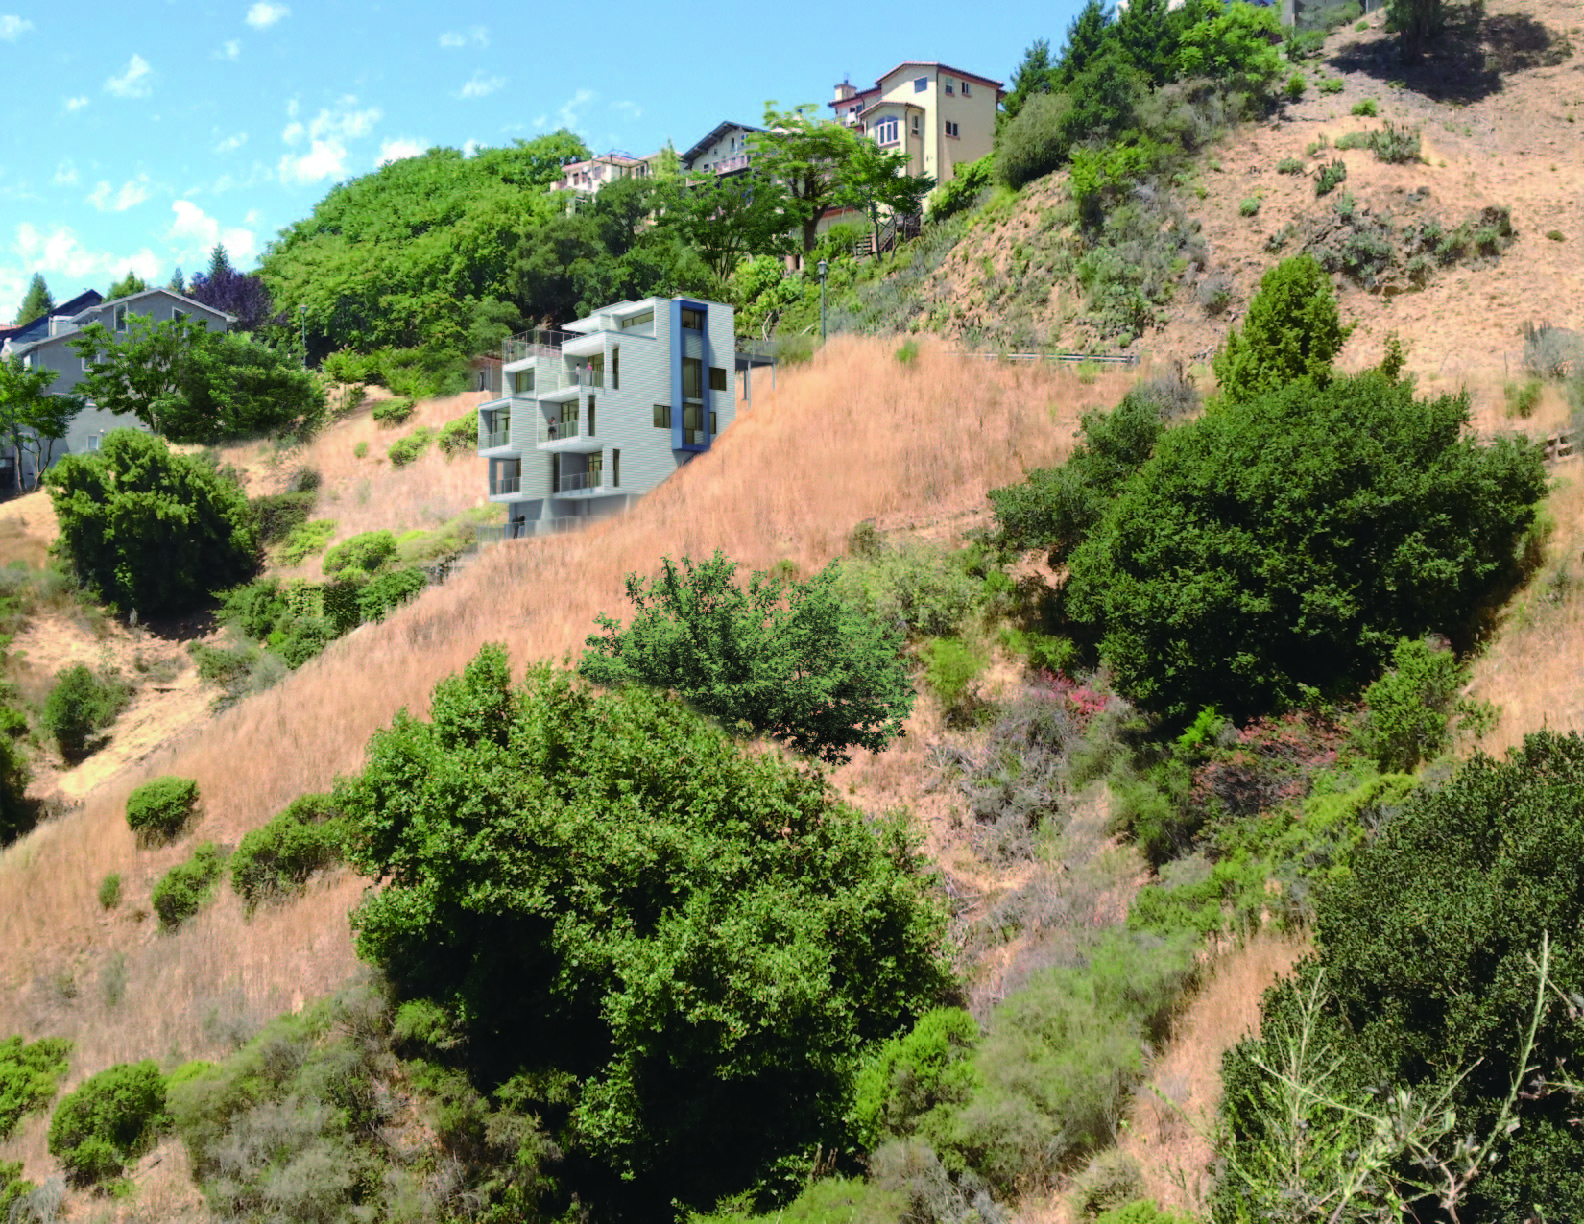 Sunset has selected the Berkeley Hills neighborhood of Berkeley, CA as the location for its 2016 Idea House.